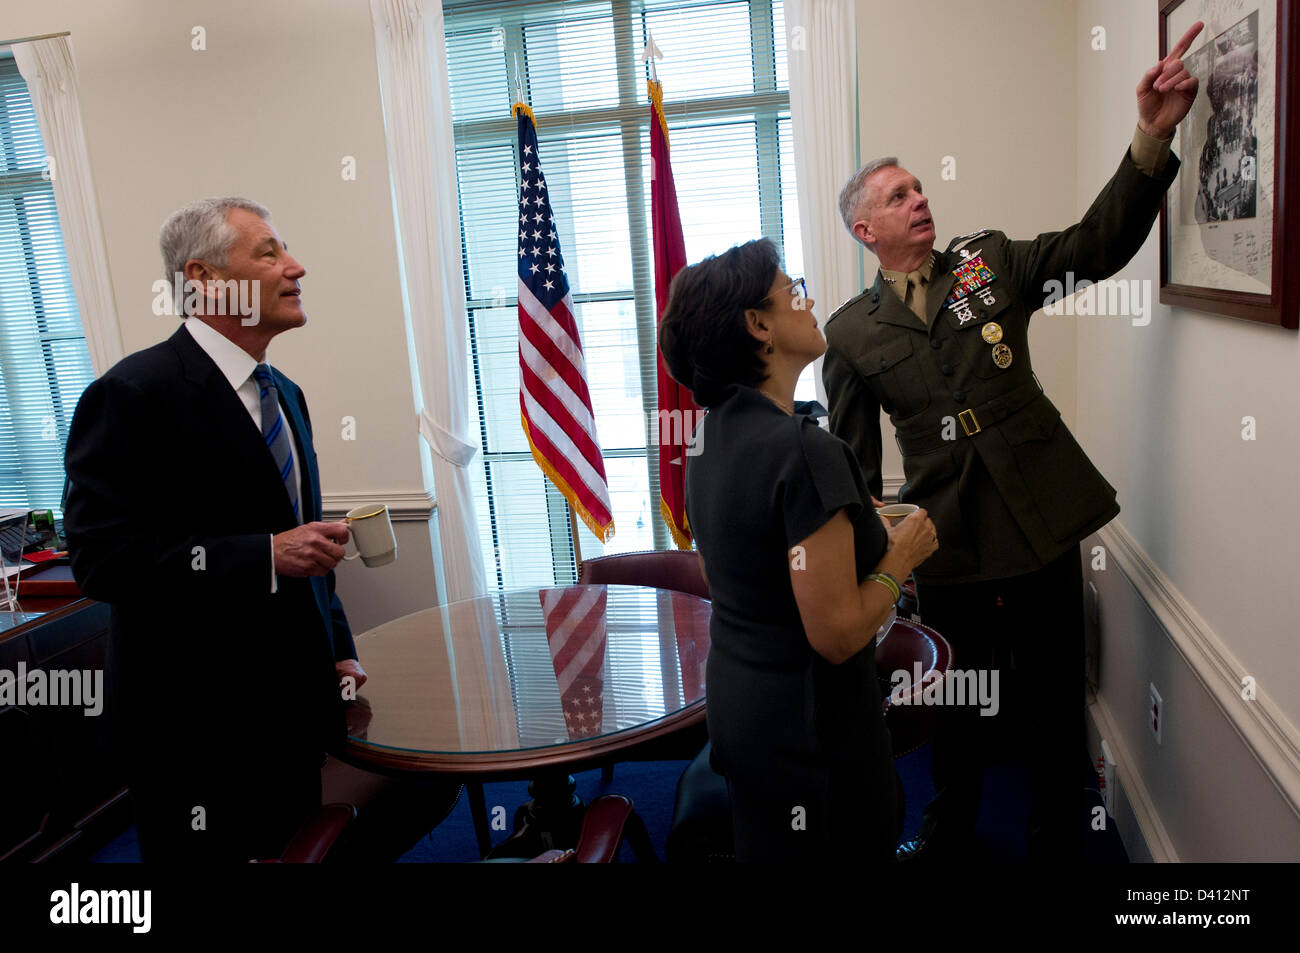 US Secretary of Defense Chuck Hagel and his wife Lilibet are given a tour by his senior military advisor, Marine Corps Lt. Gen. Thomas Waldhauser as the new Secretary February 27, 2013 in Arlington, Virginia. Stock Photo